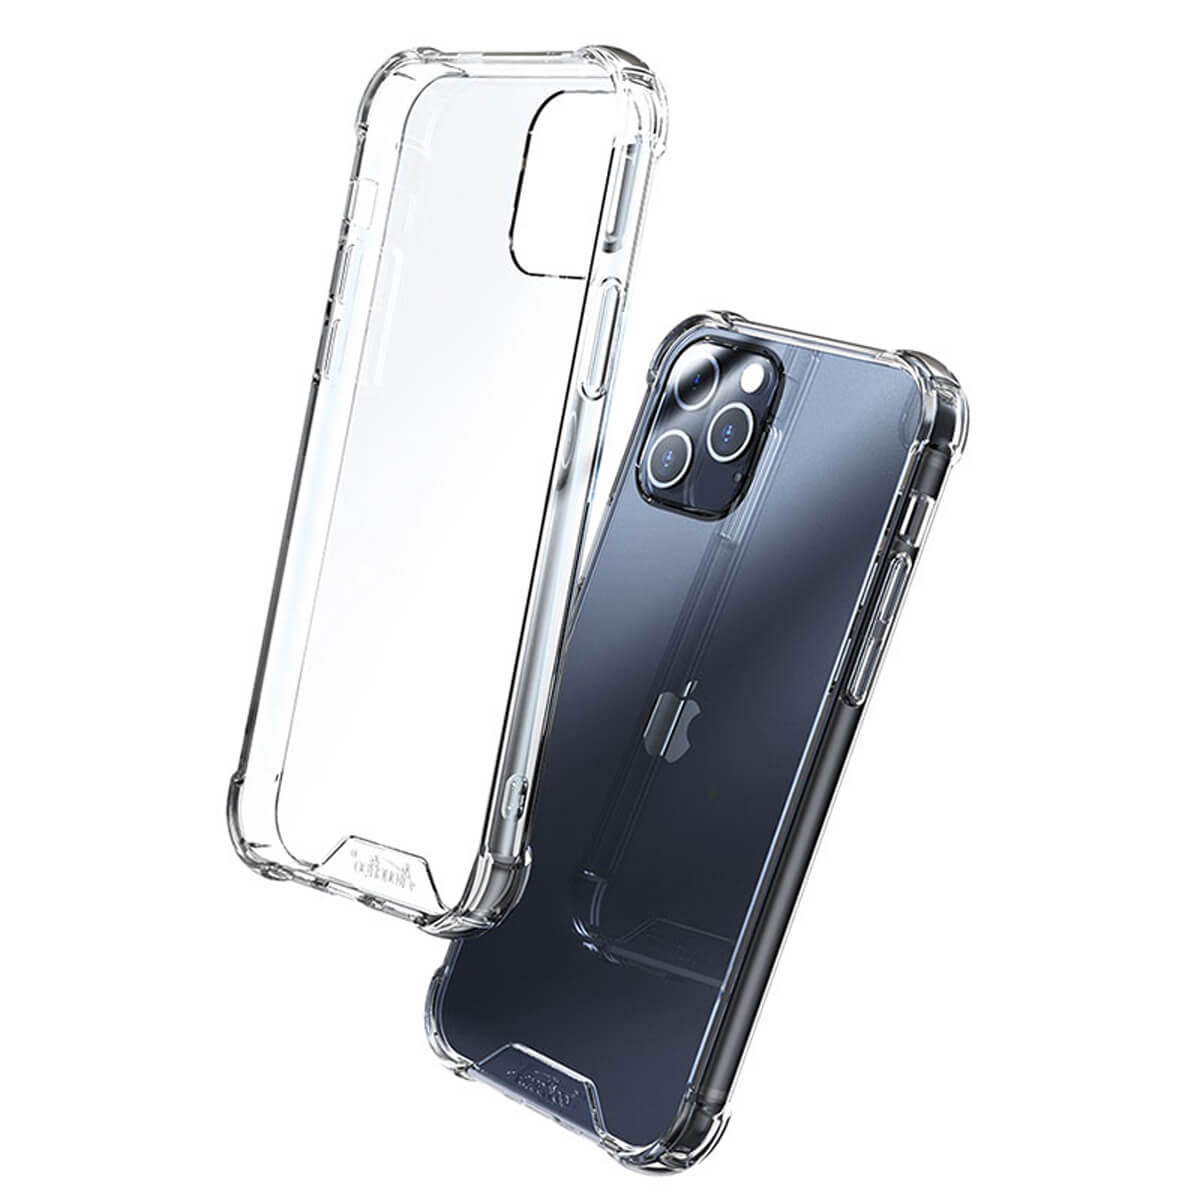 ANTI-BURST PROTECTION CASE IPHONE 11 (CLEAR) – Fone King